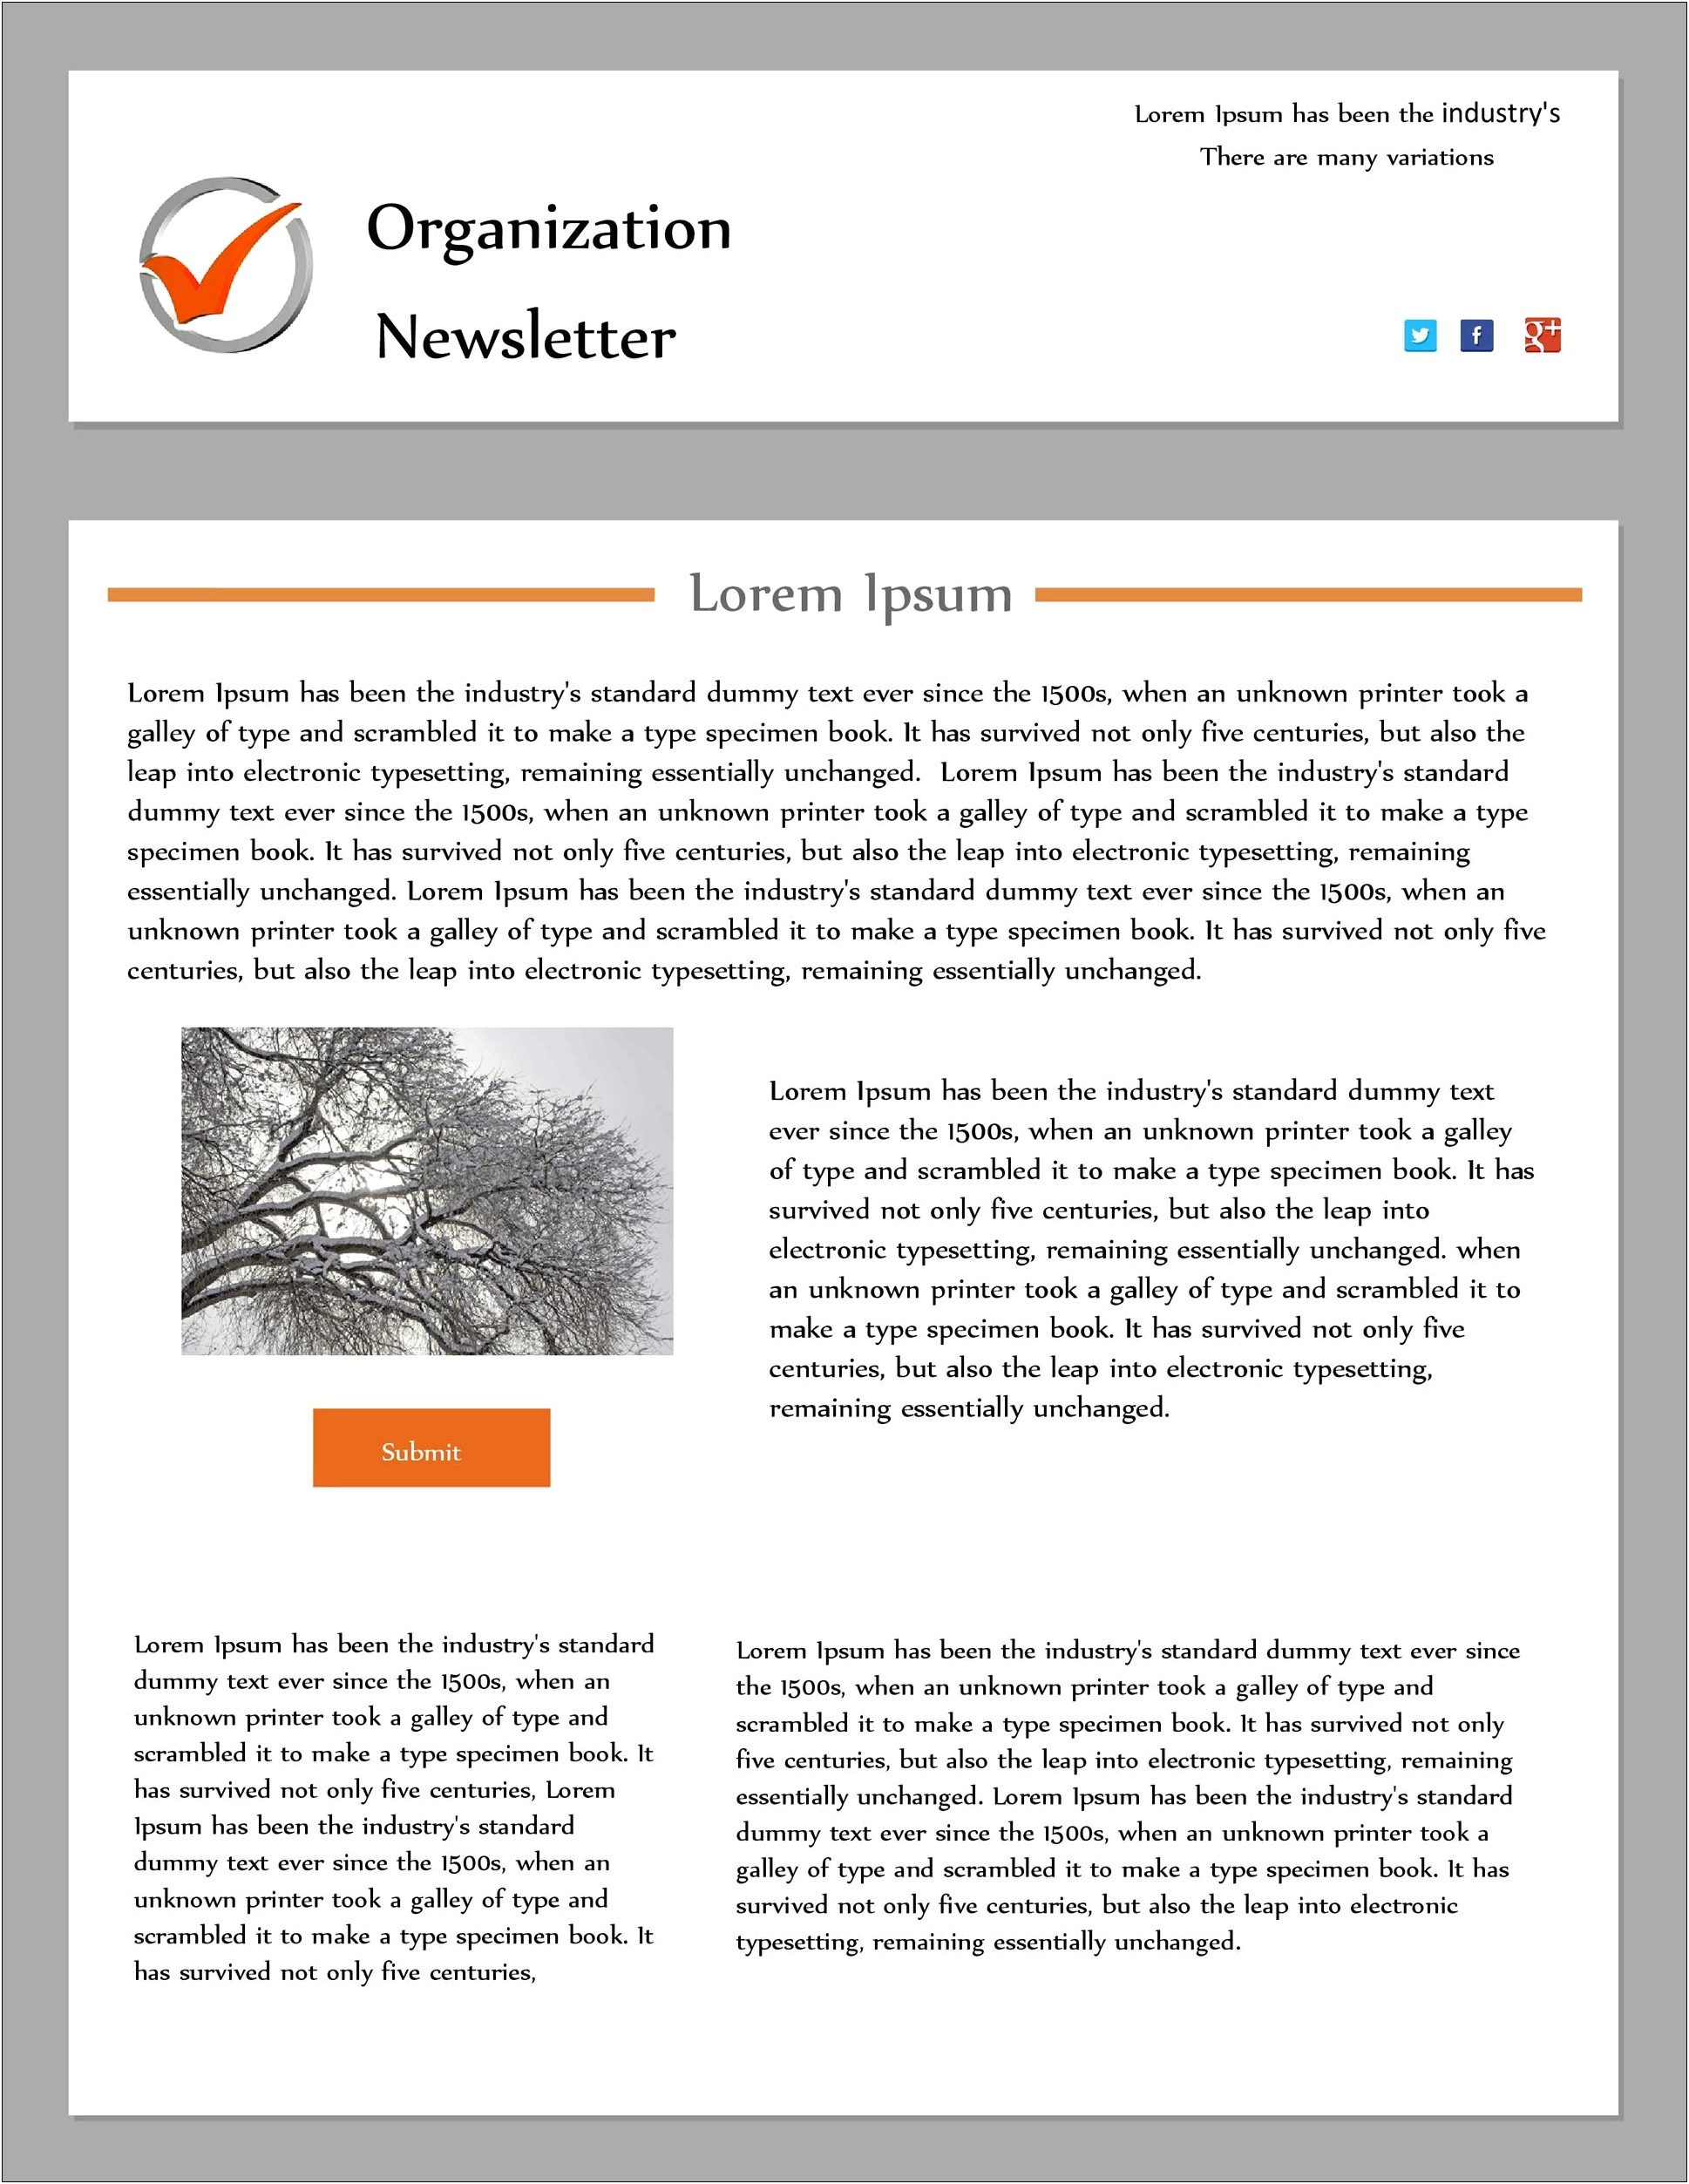 Free School Newsletter Templates For Publisher